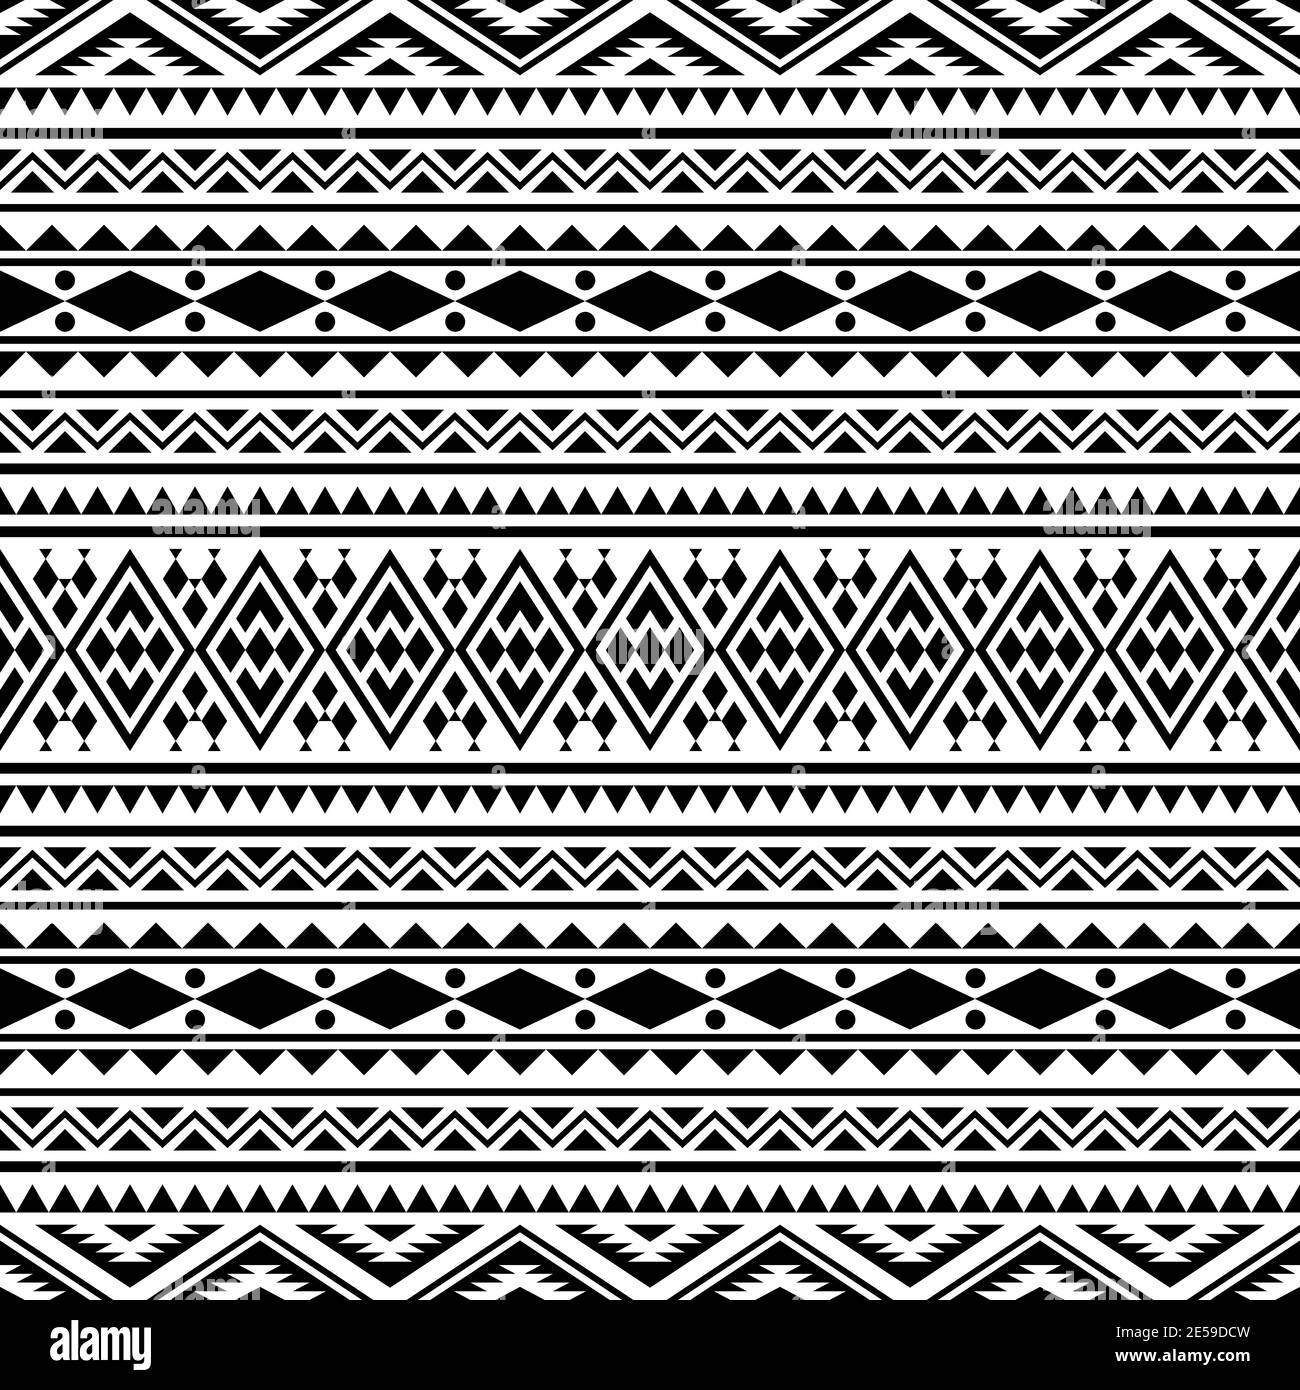 Traditional Ikat aztec ethnic pattern vector in black and white color ...